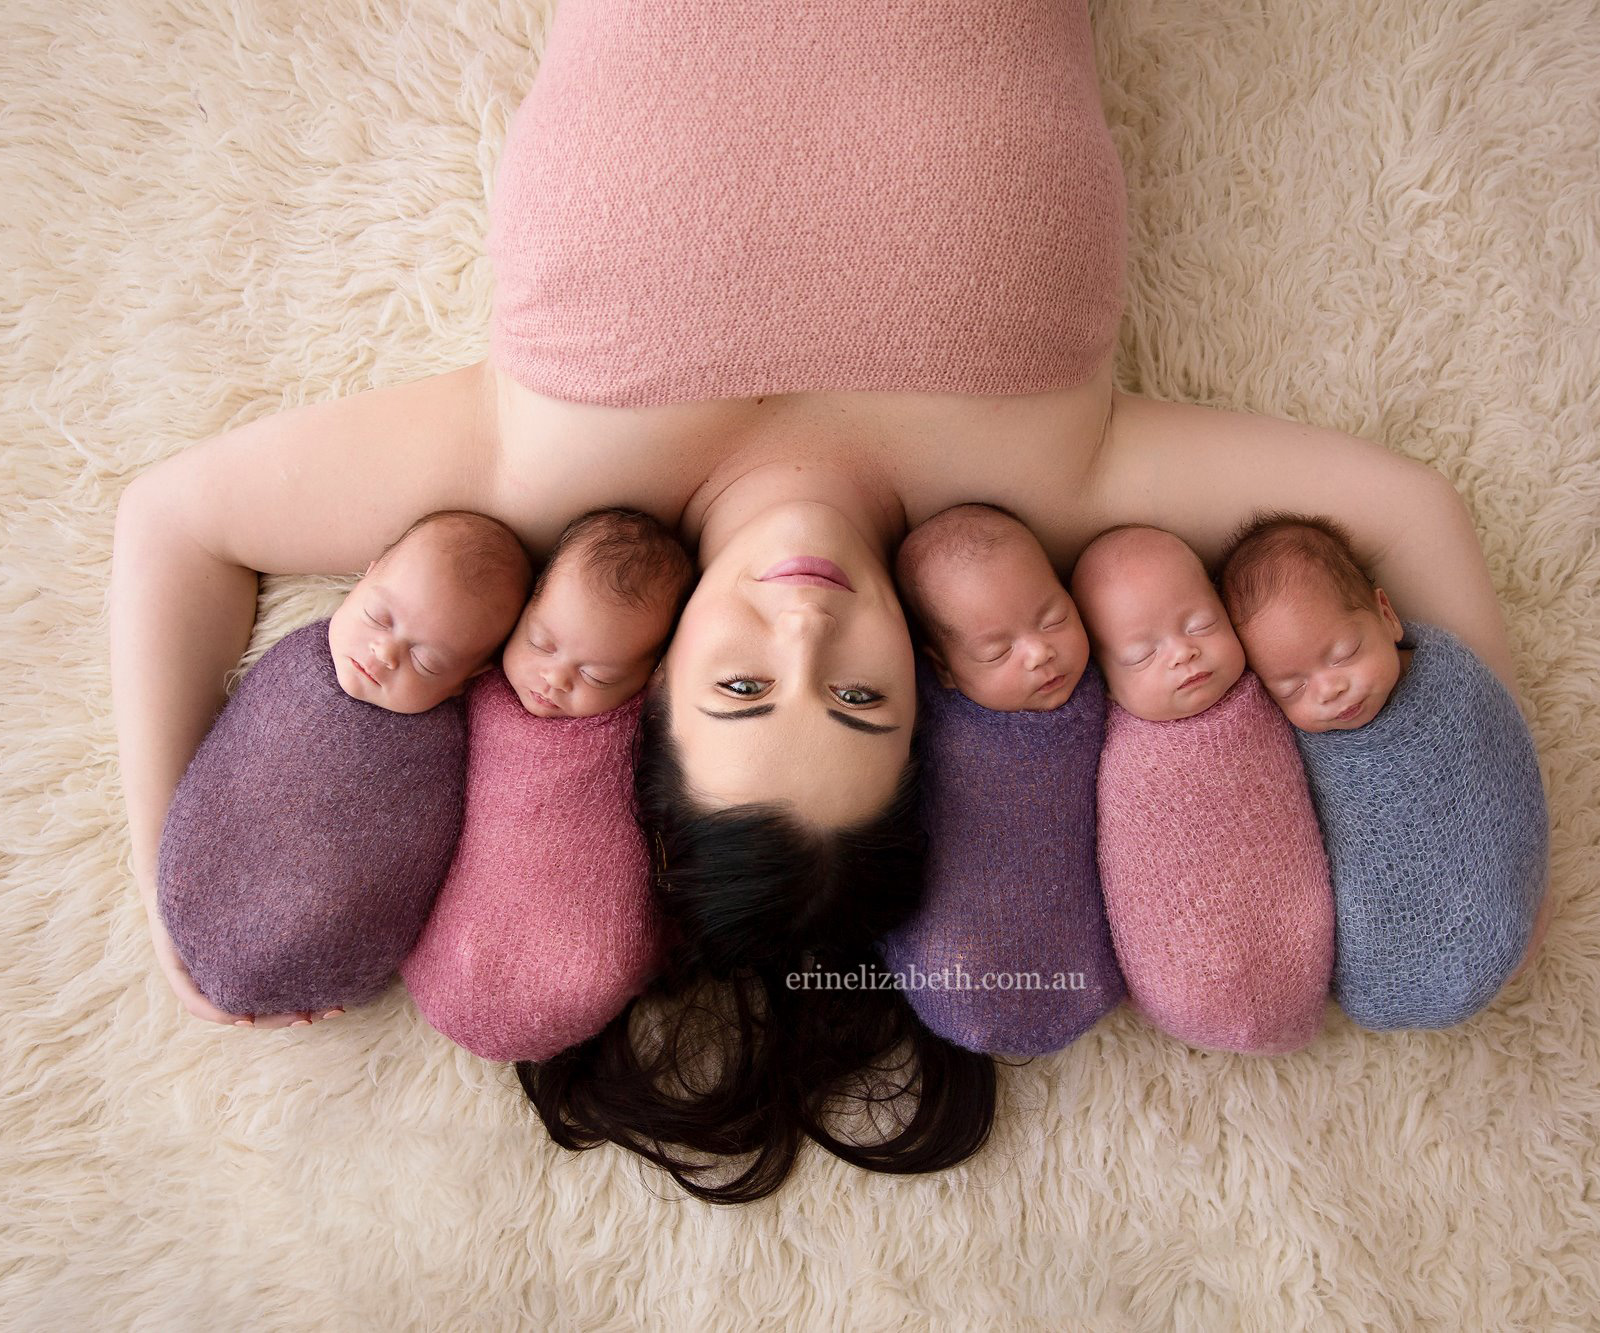 Mother of quintuplets shares beautiful photos